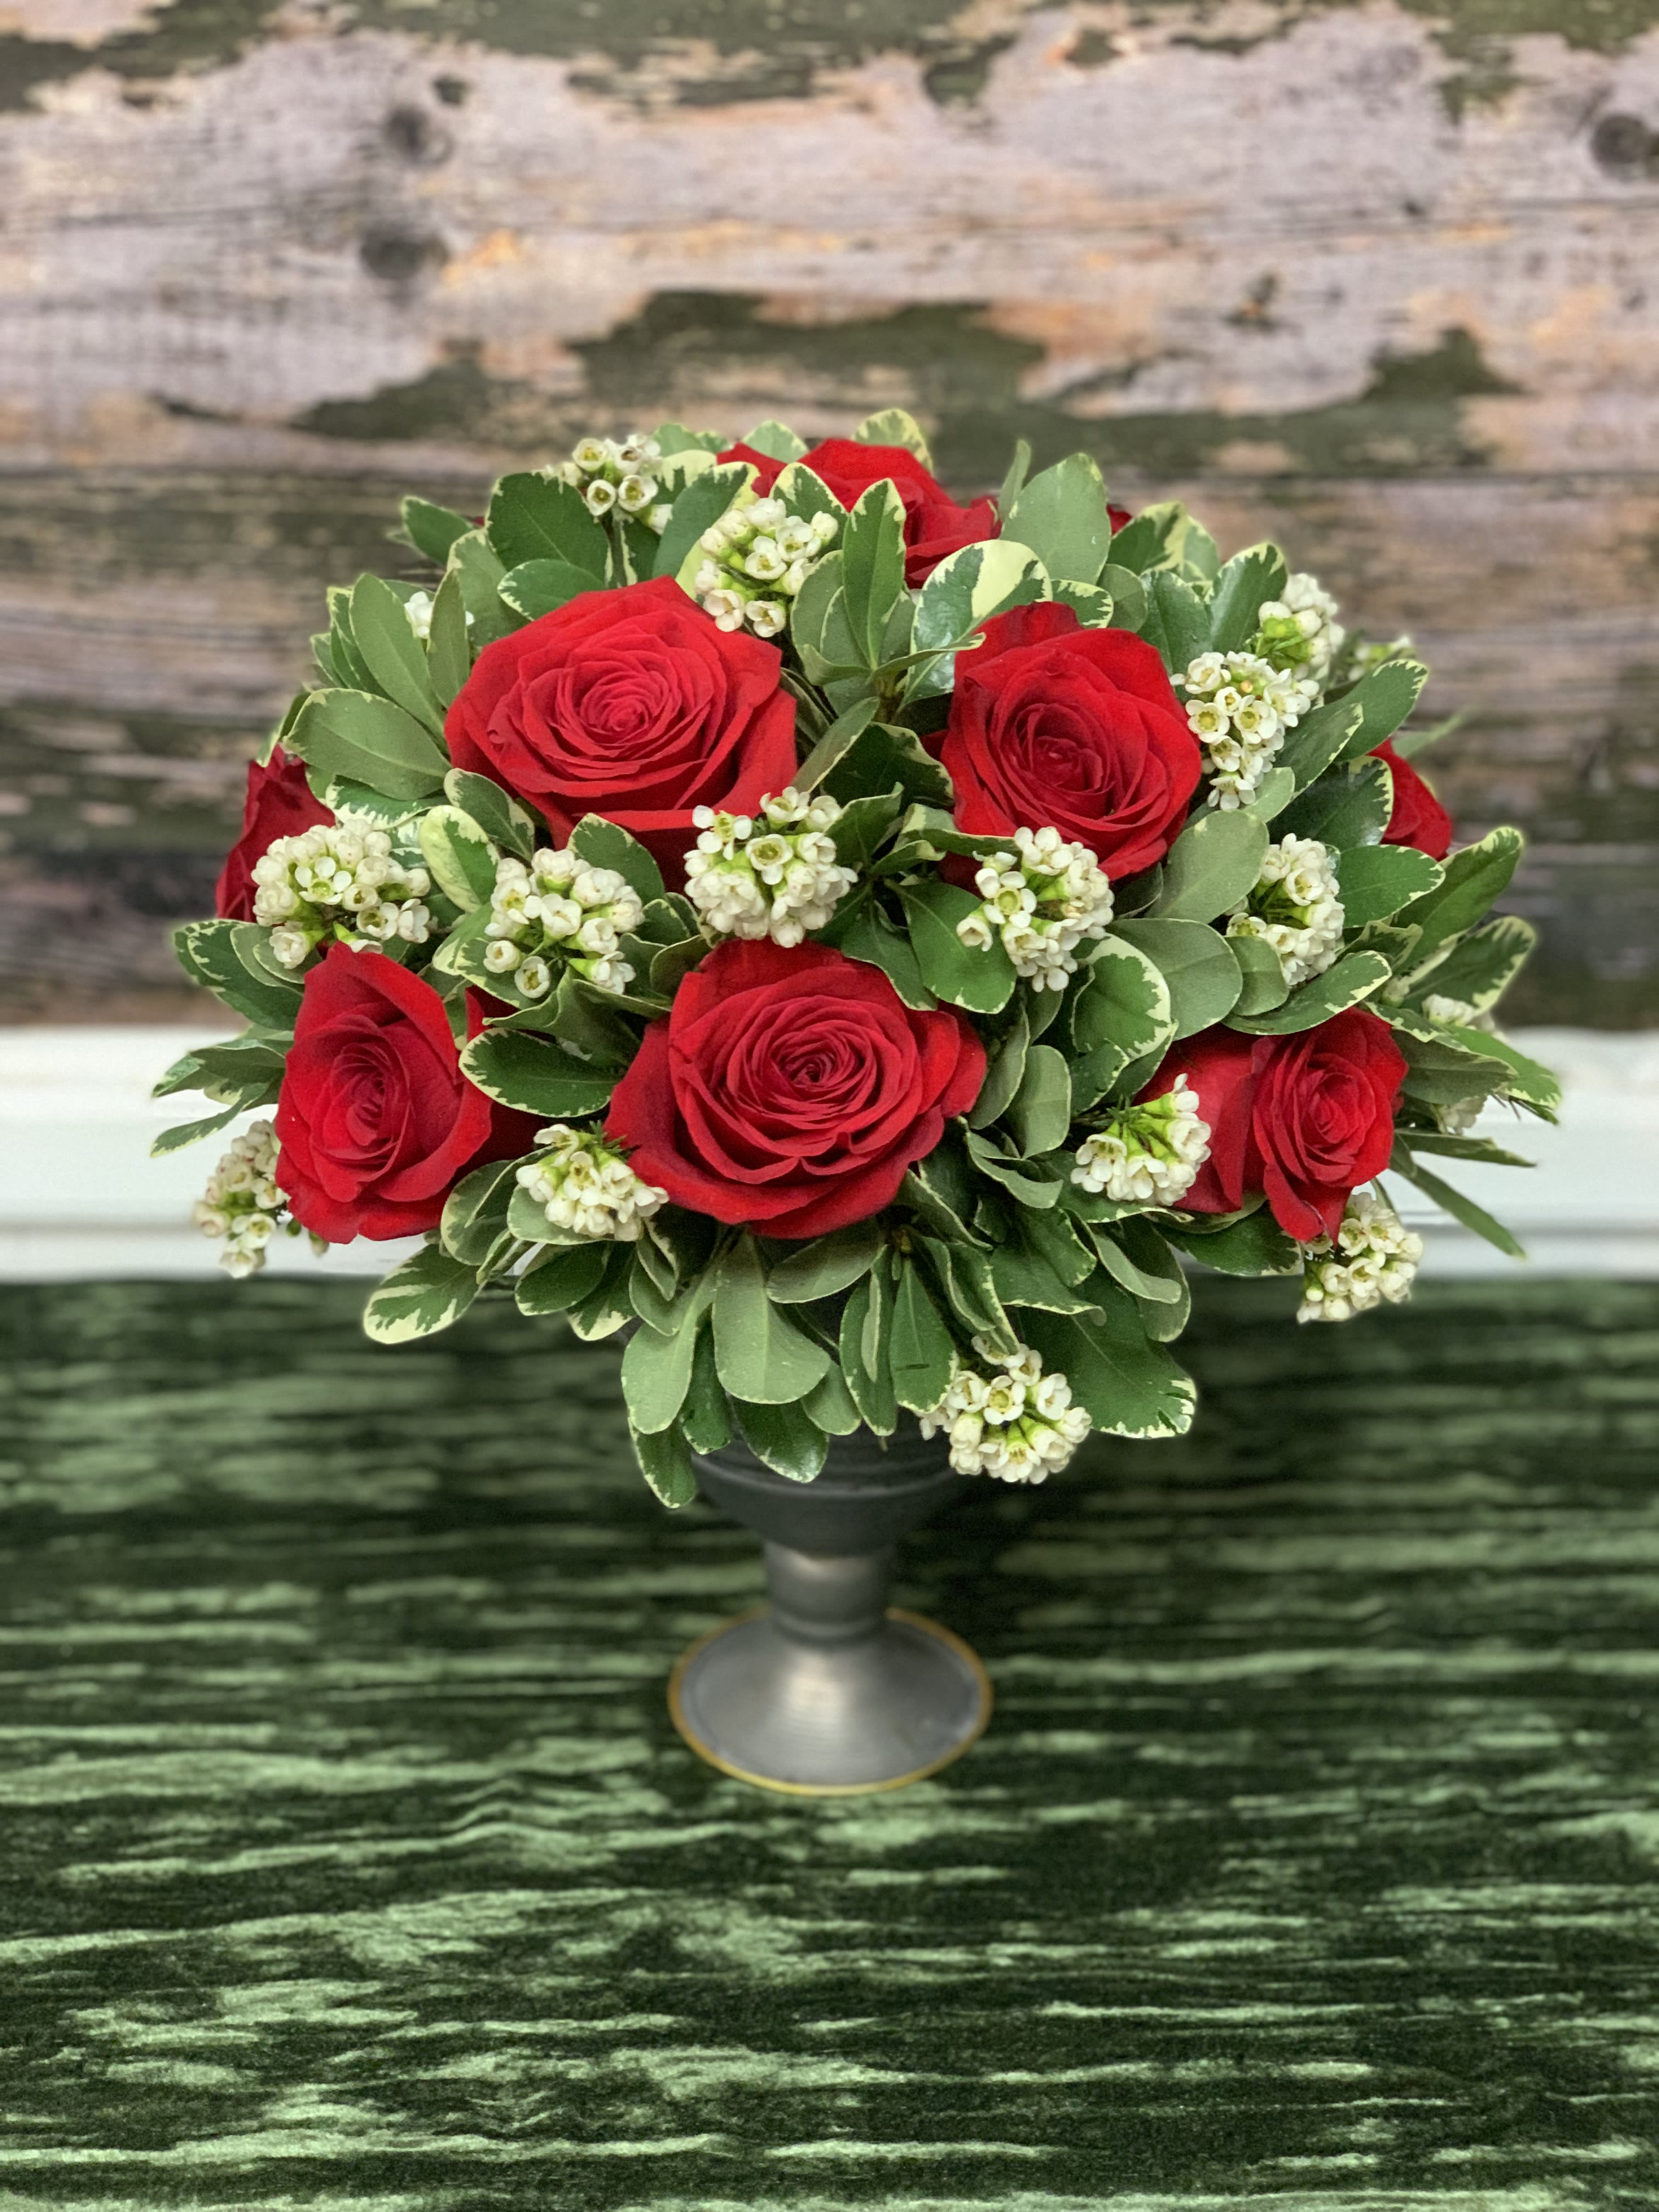 Rose Compote  - Red Roses, Waxflower, and Mixed Greenry Arrive in a Metal Compote. 